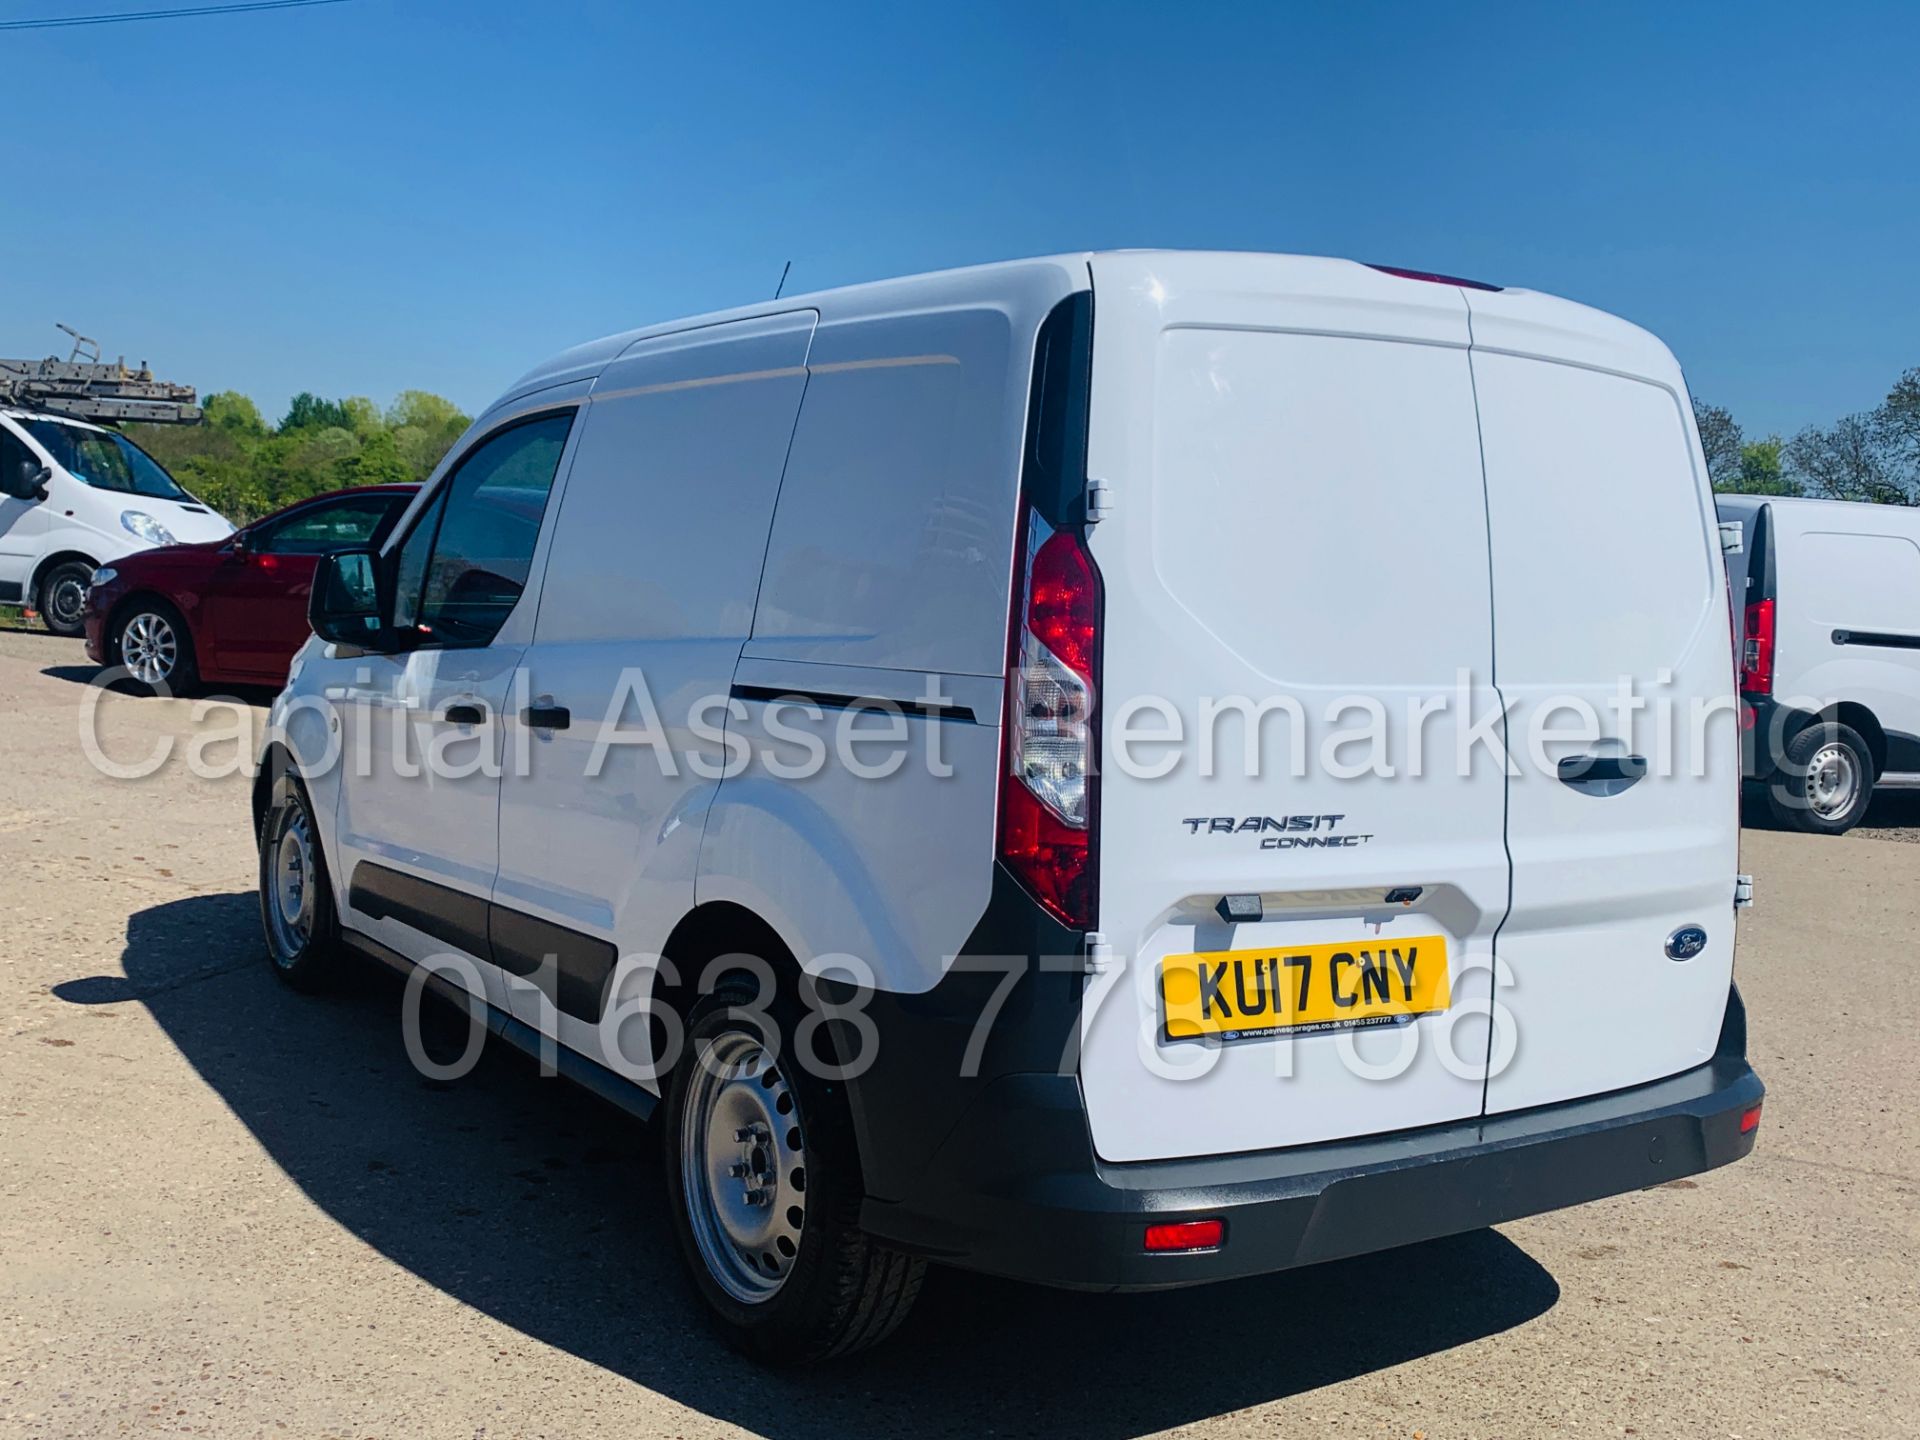 (On Sale) FORD TRANSIT CONNECT *SWB* (2017 - EURO 6) '1.5 TDCI - 6 SPEED' (1 OWNER - FULL HISTORY) - Image 6 of 38